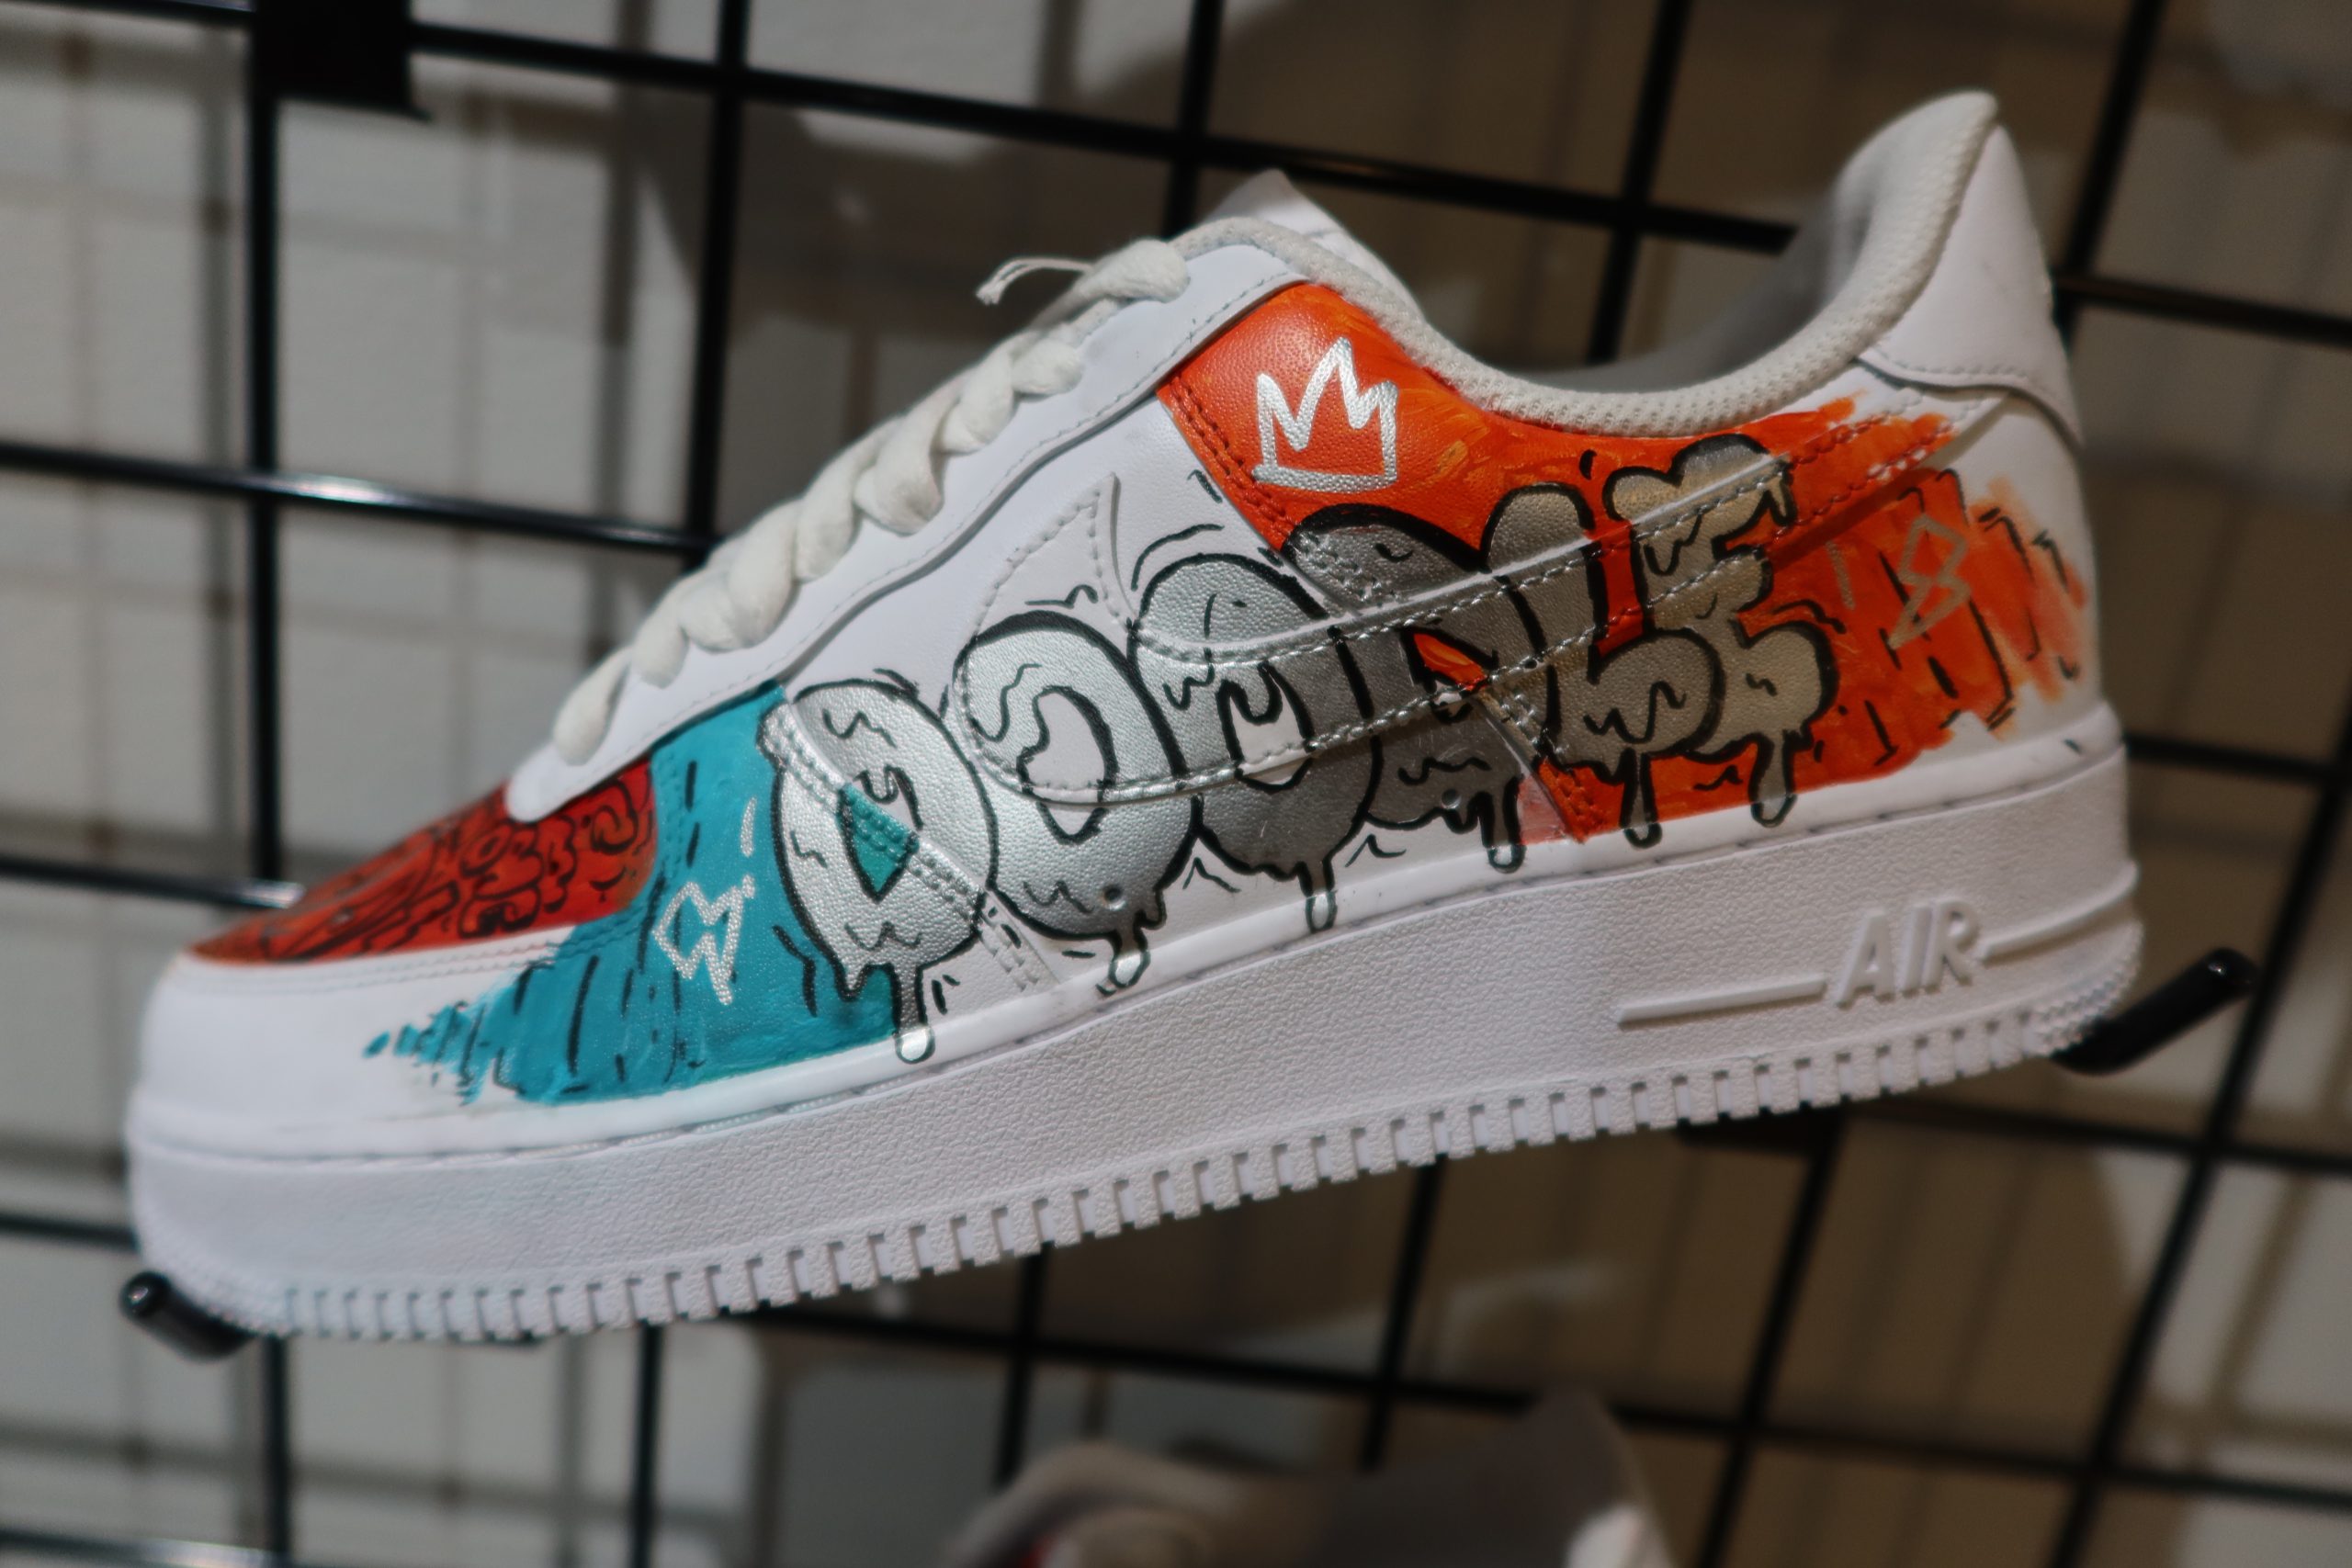 The Legality of Customization in the Sneaker Industry